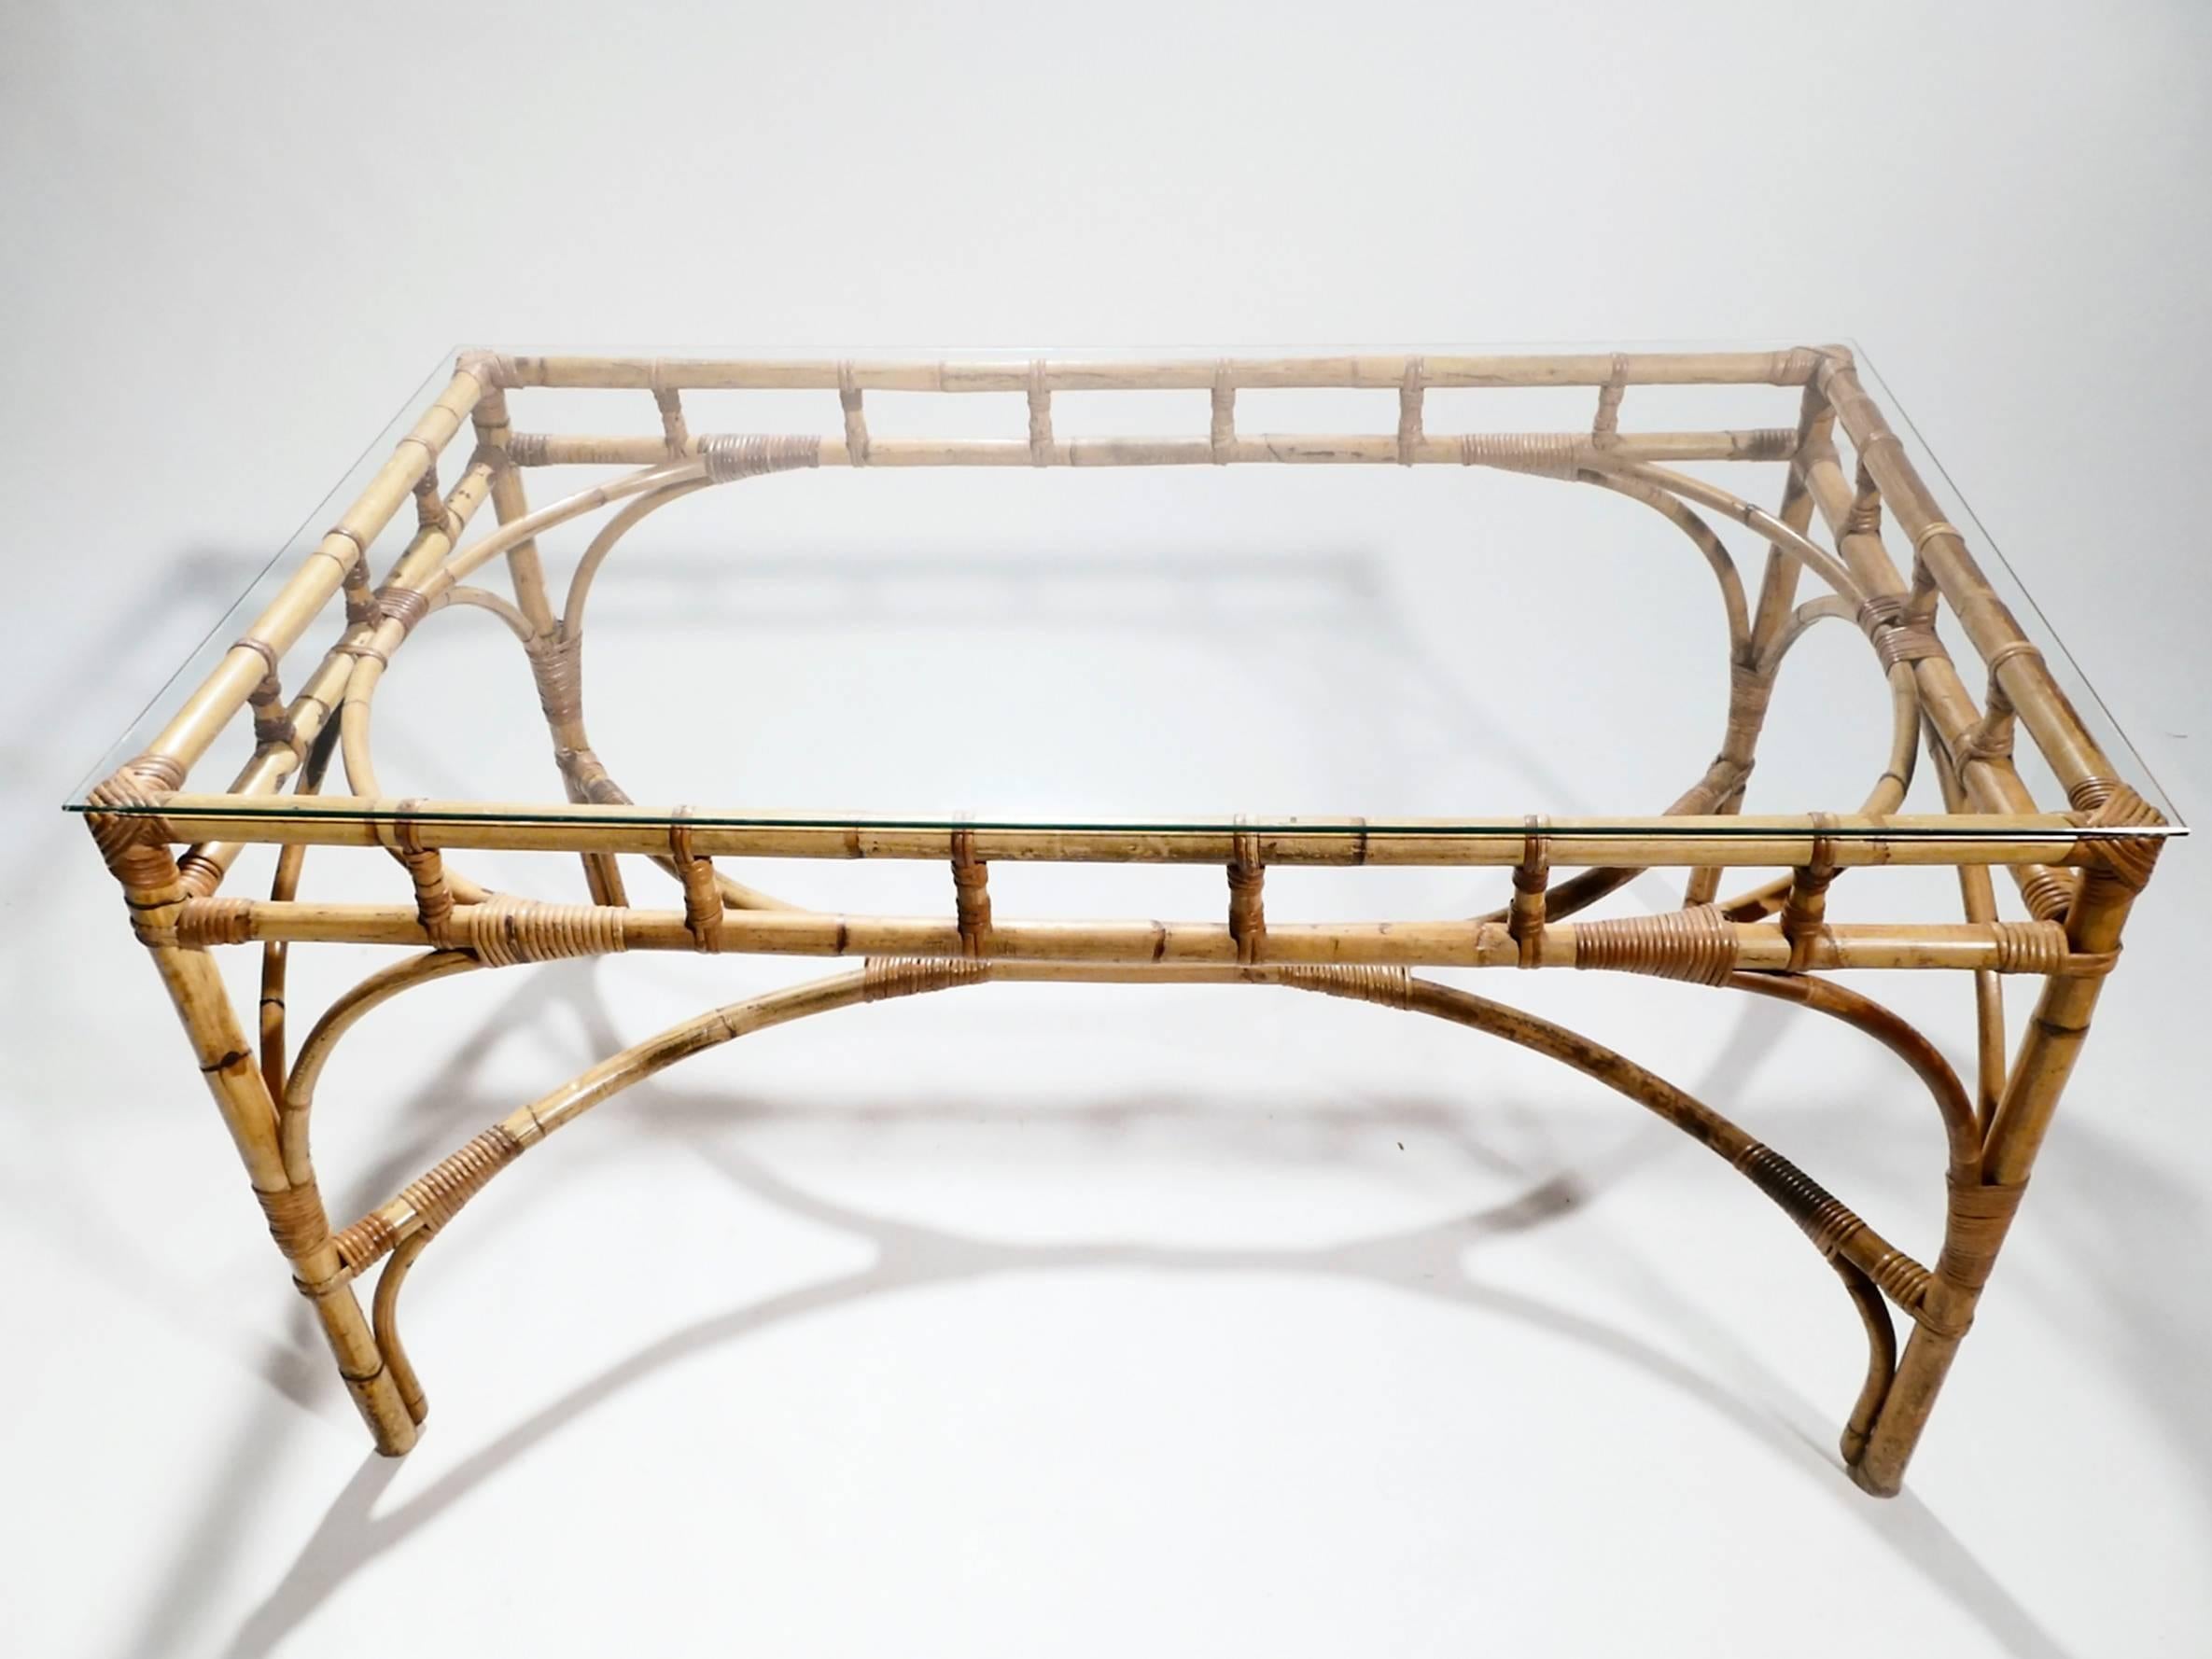 This rattan and bamboo table, with its crisscross-backed chairs and transparent tabletop, effortlessly balances the extravagant Hollywood Regency style and clean-lined Mid-Century Modern style. The clear glass surface allows the warm bamboo legs to